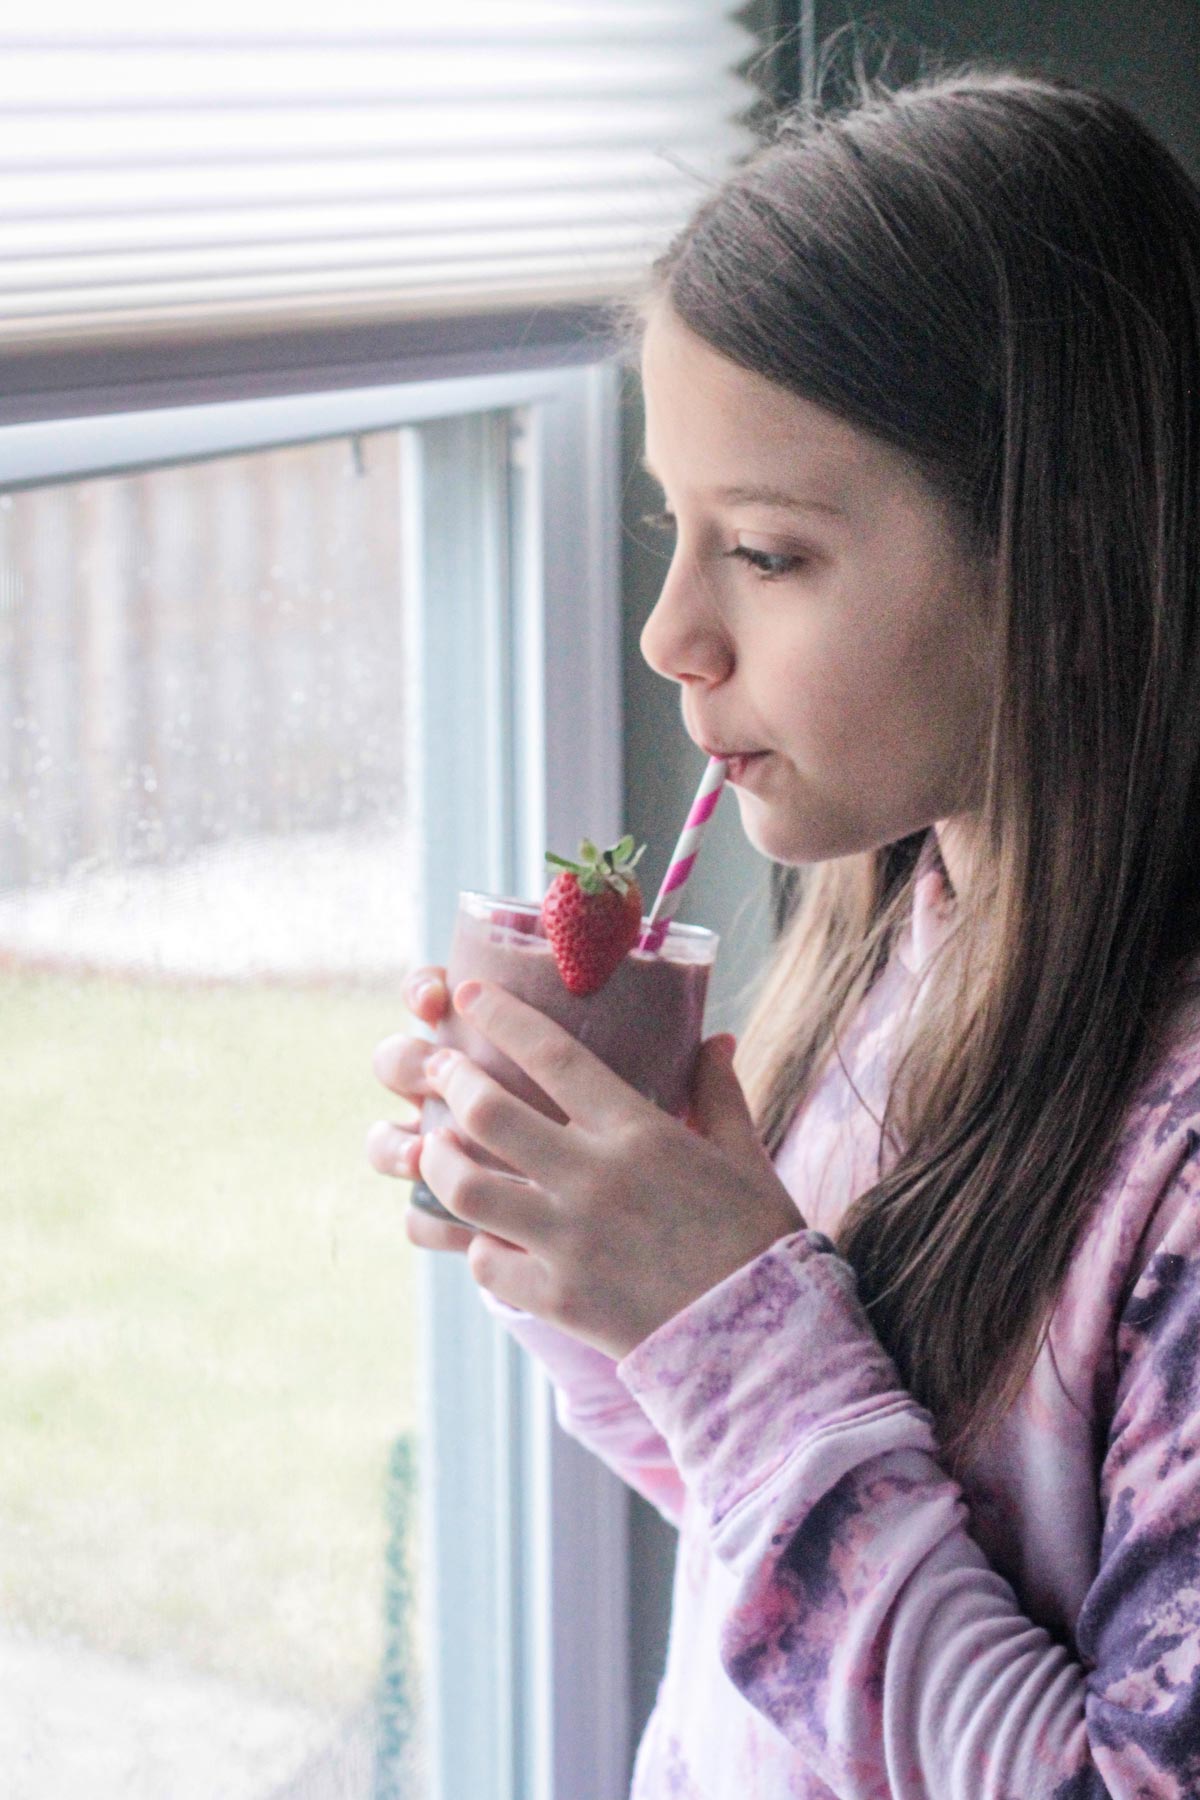 Young girl sipping a smoothie while looking out the window.